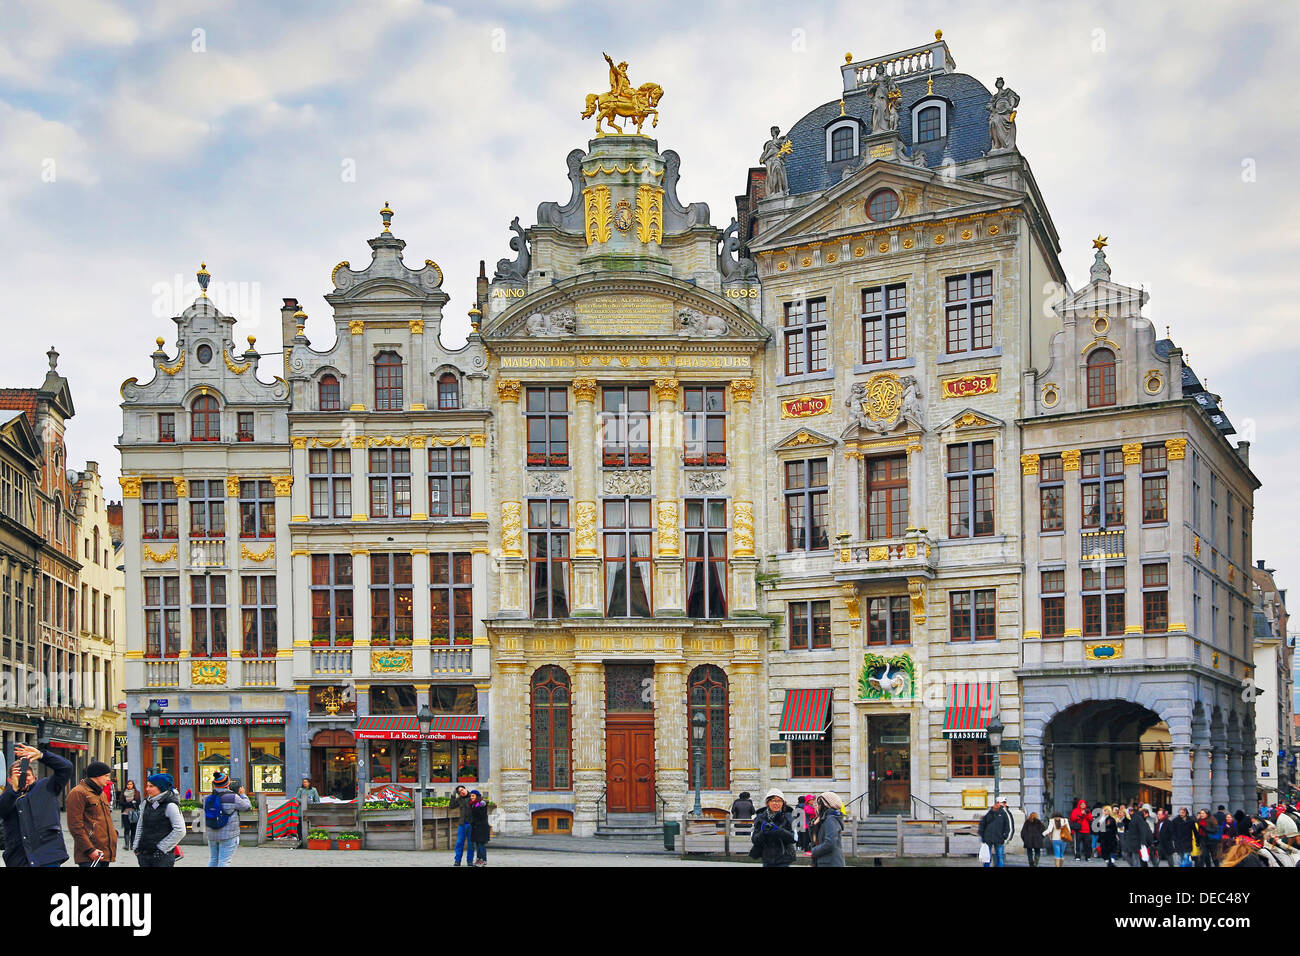 Guild houses on Grand Place or Grote Markt square, Brussels, Brussels Region, Belgium Stock Photo